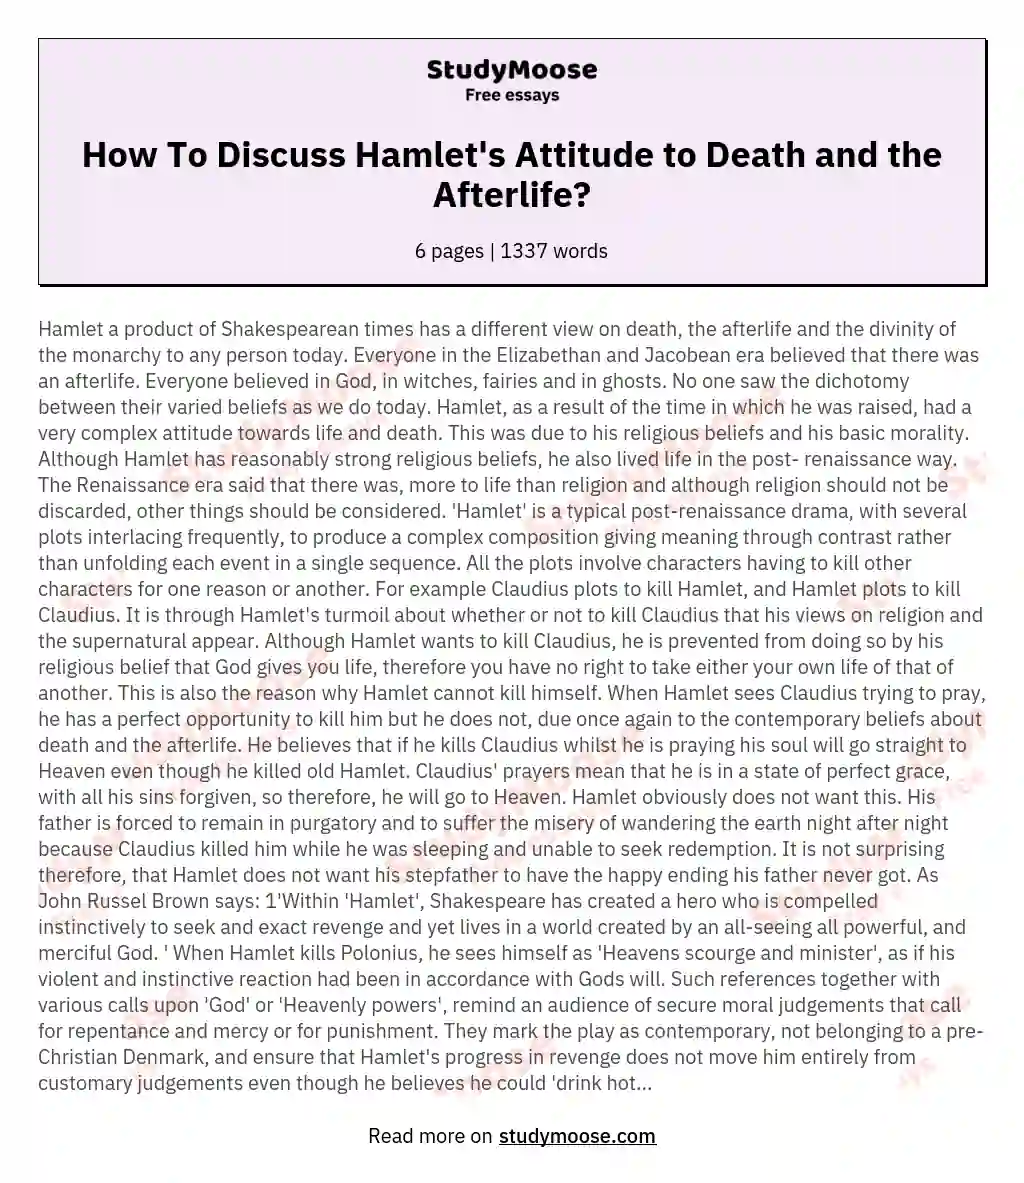 How To Discuss Hamlet's Attitude to Death and the Afterlife?